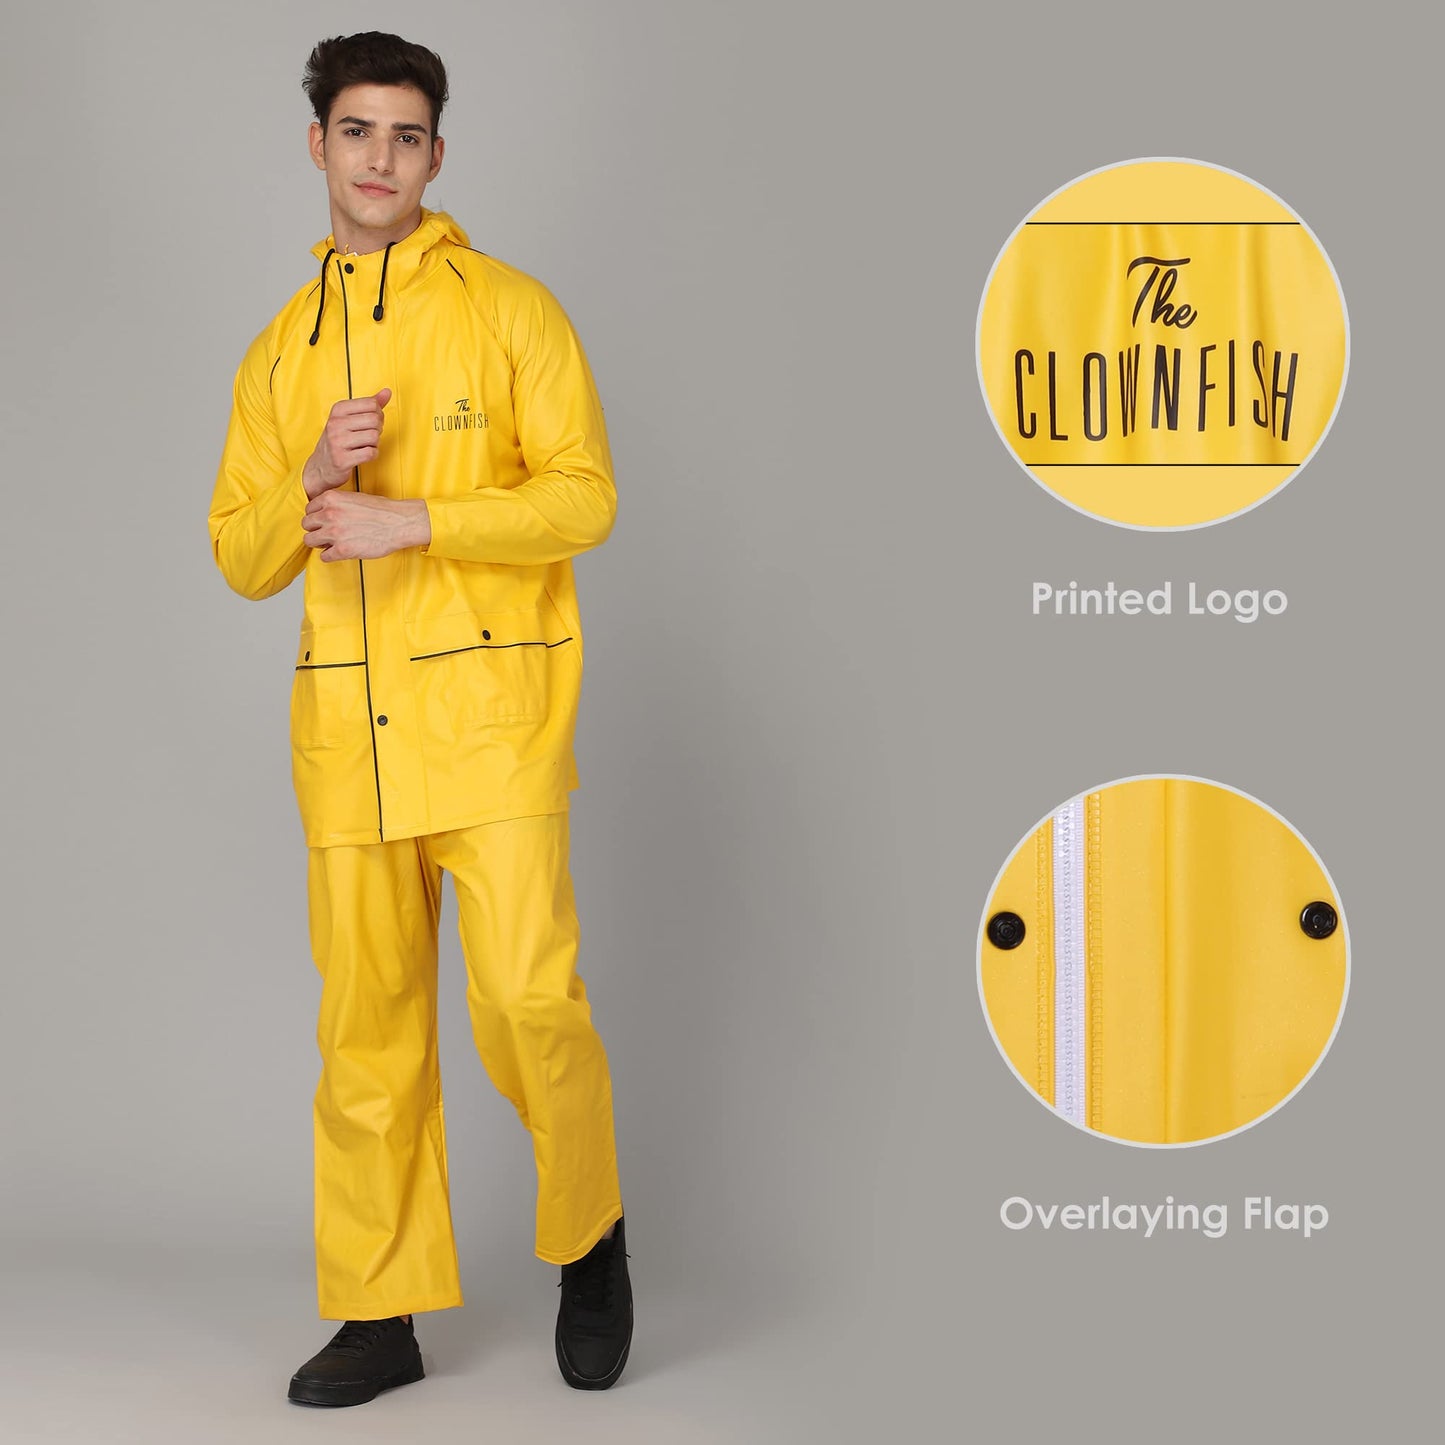 THE CLOWNFISH Oceanic Men's Waterproof PVC Raincoat with Hood and Reflector Logo at Back for Night Travelling. Set of Top and Bottom (Light Brown, XXL)